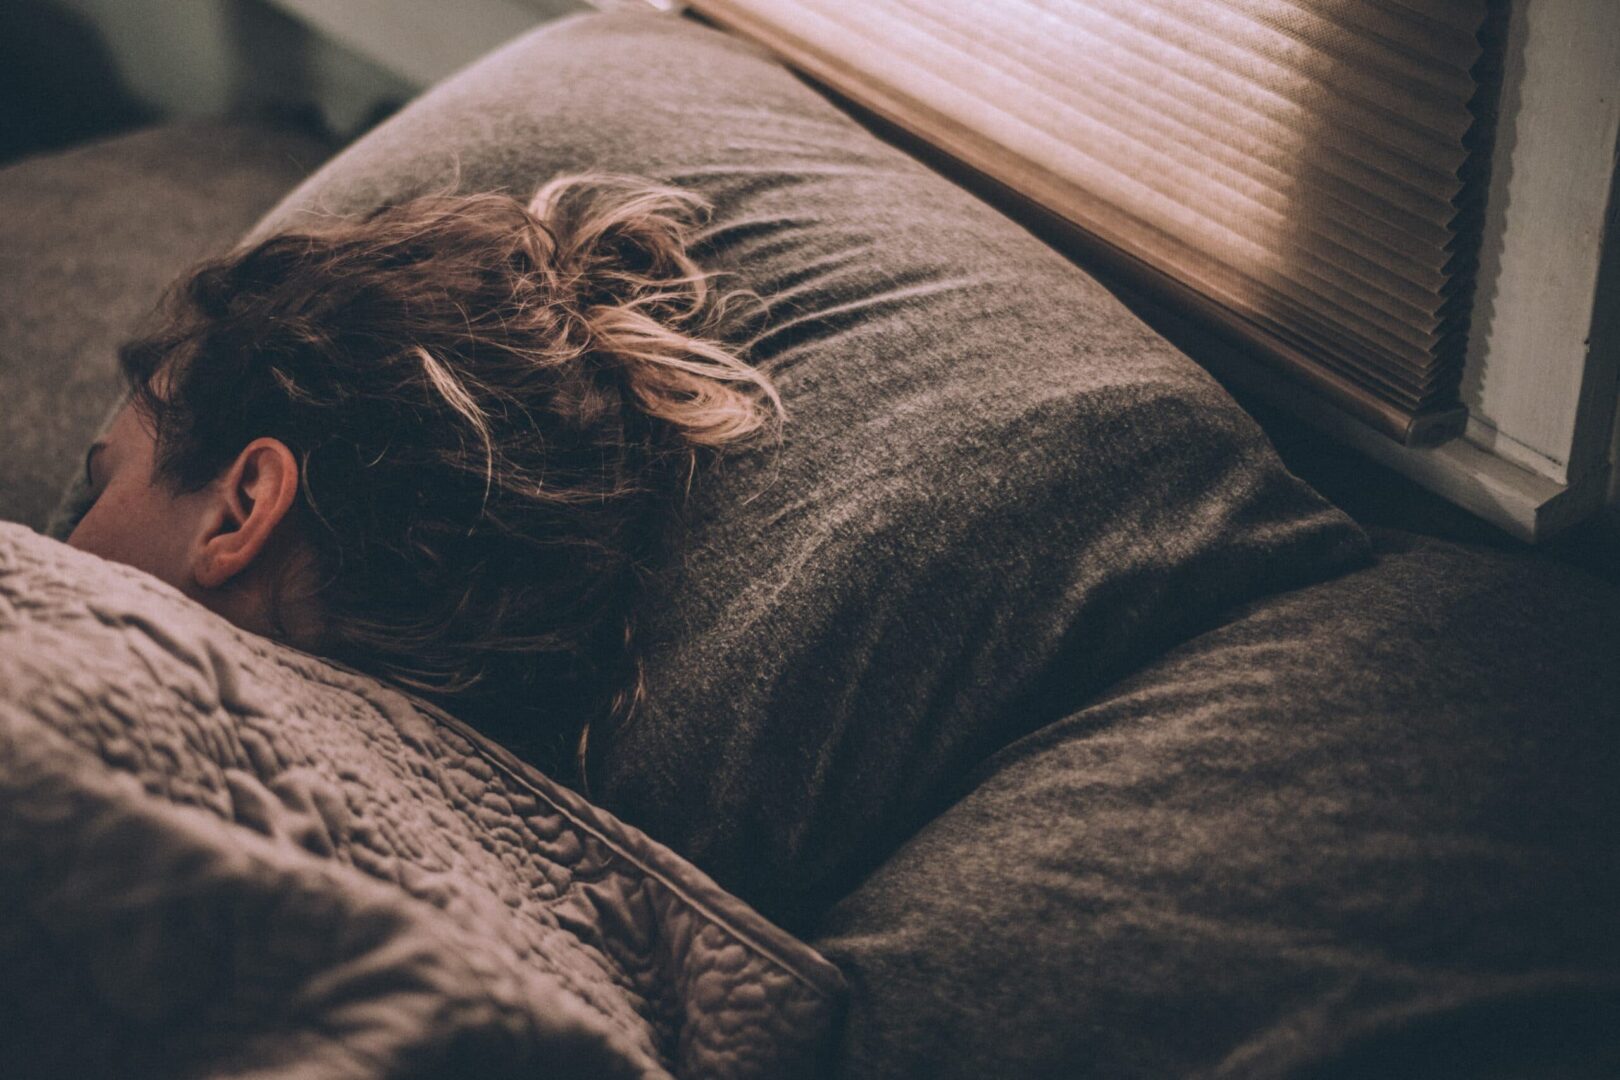 A person sleeping on the bed with their head down